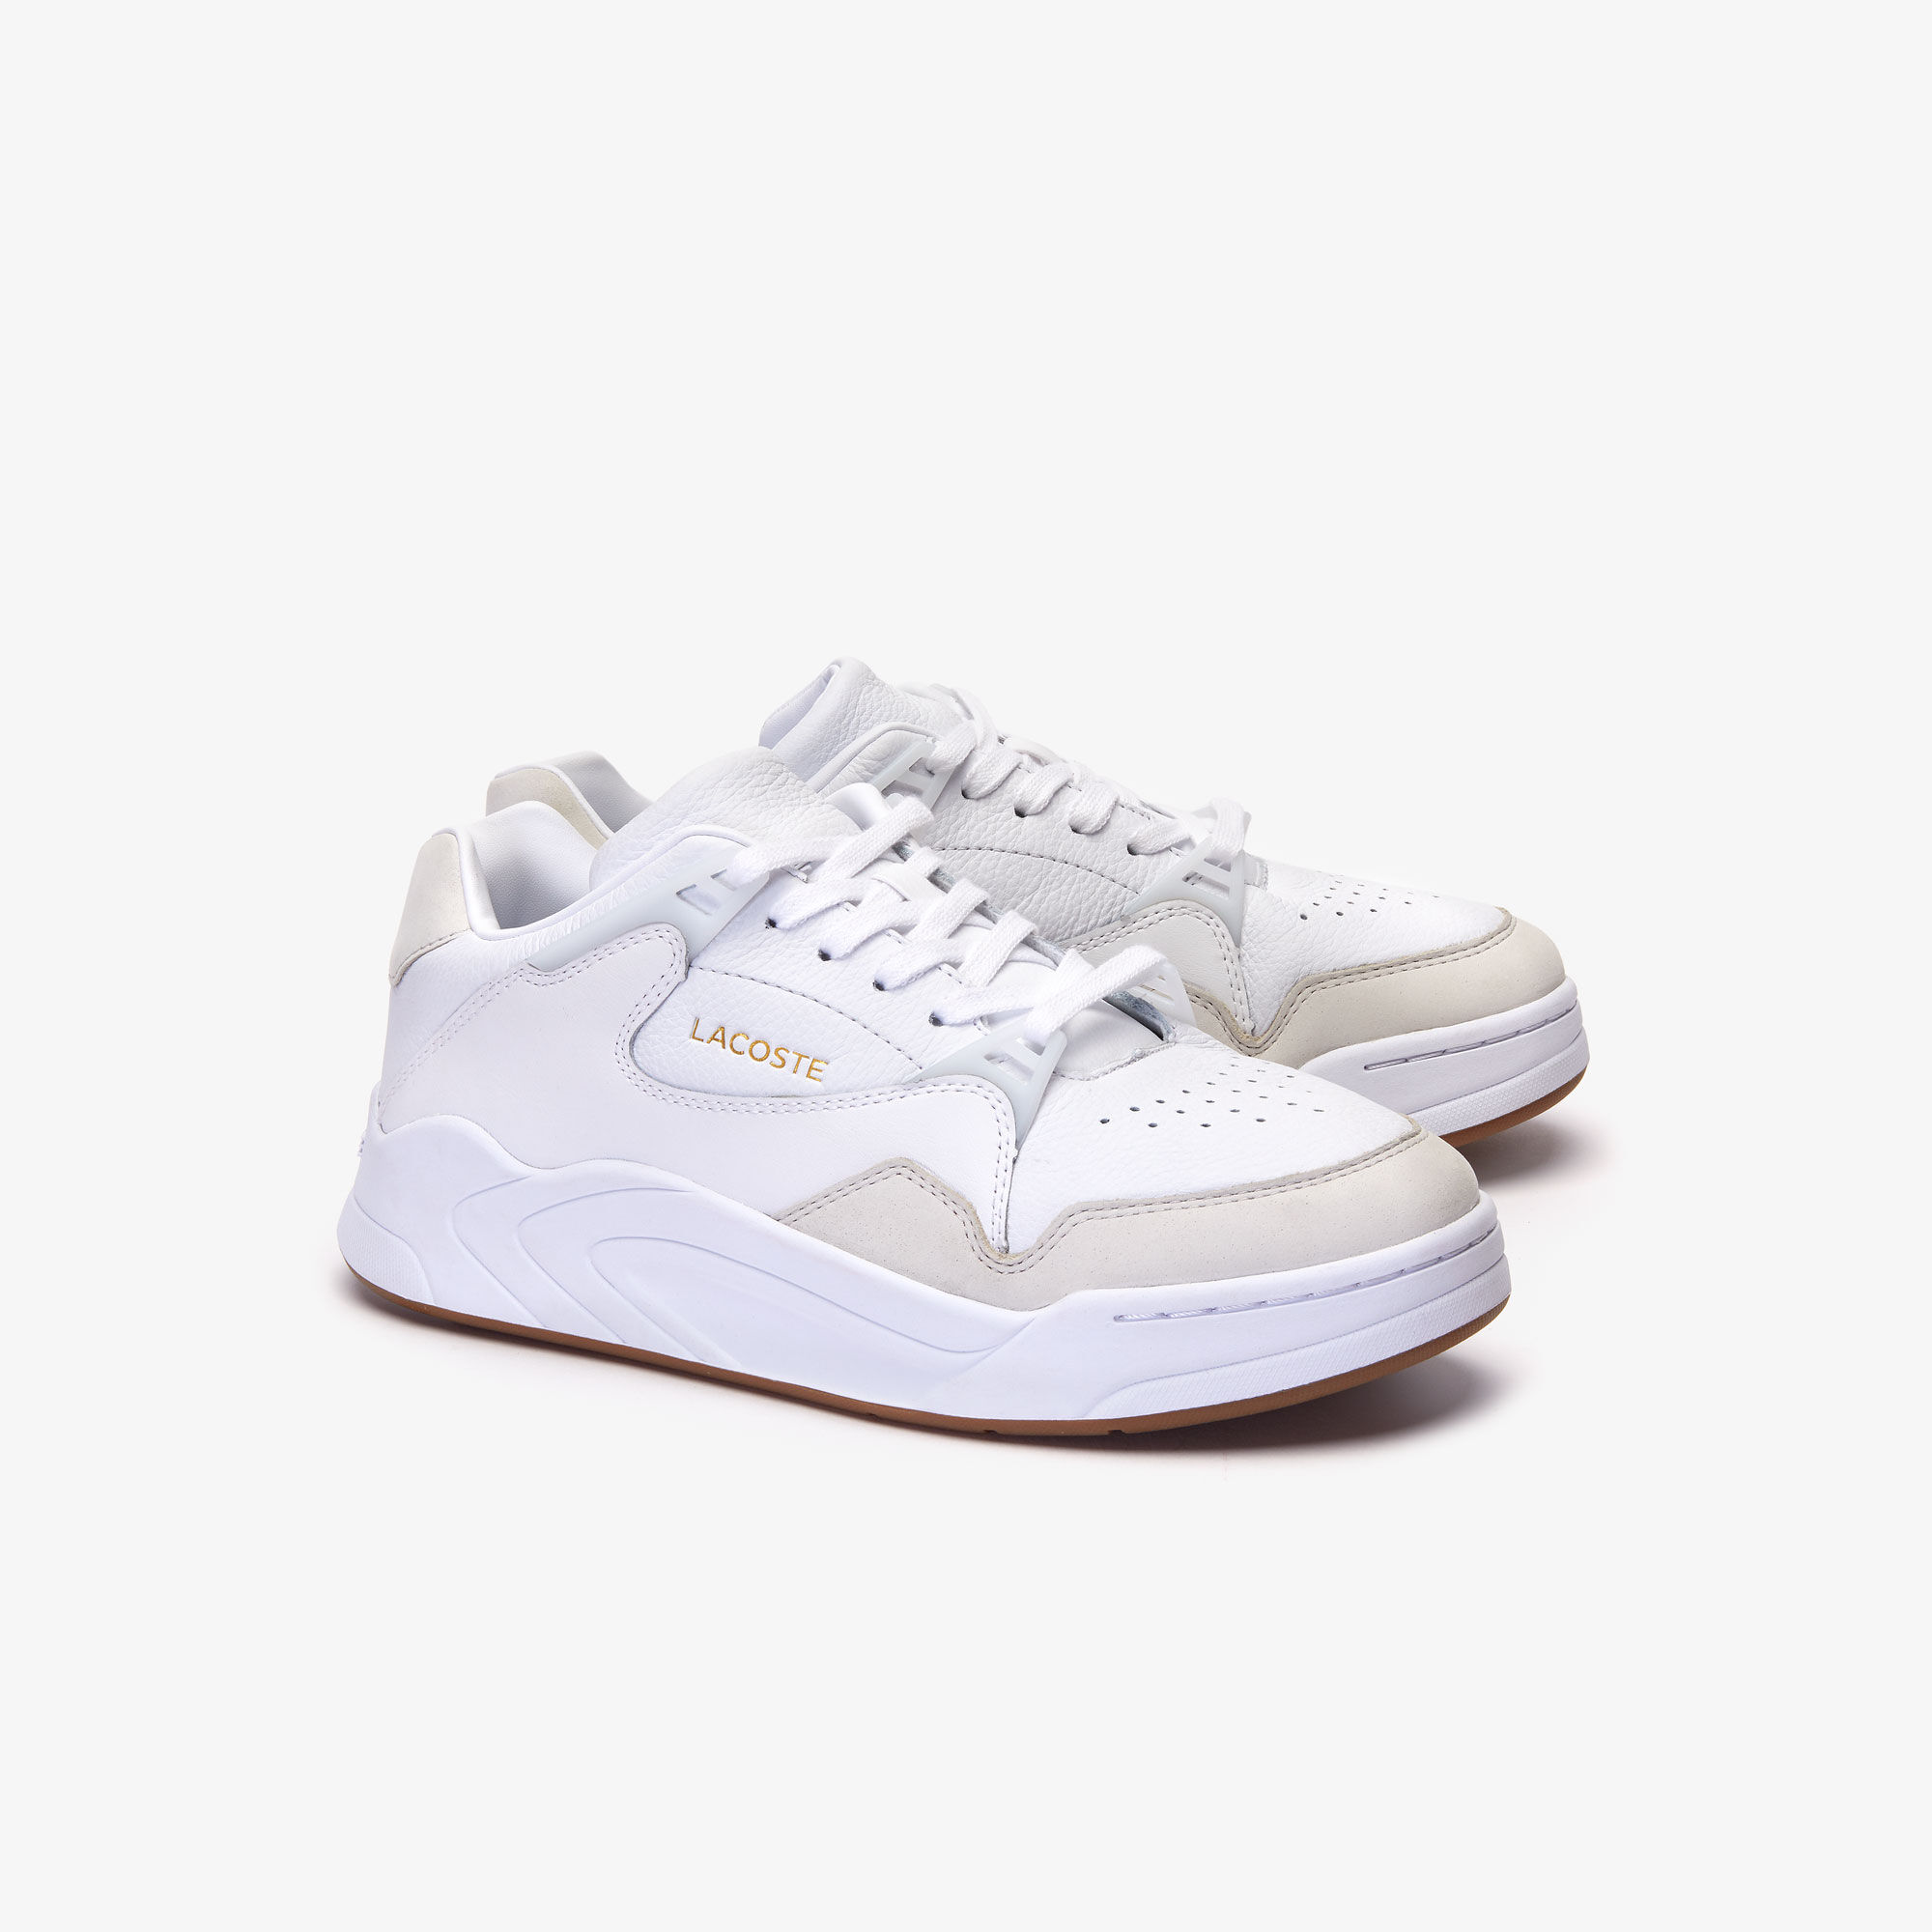 Men's Court Slam Perforated Leather Trainers